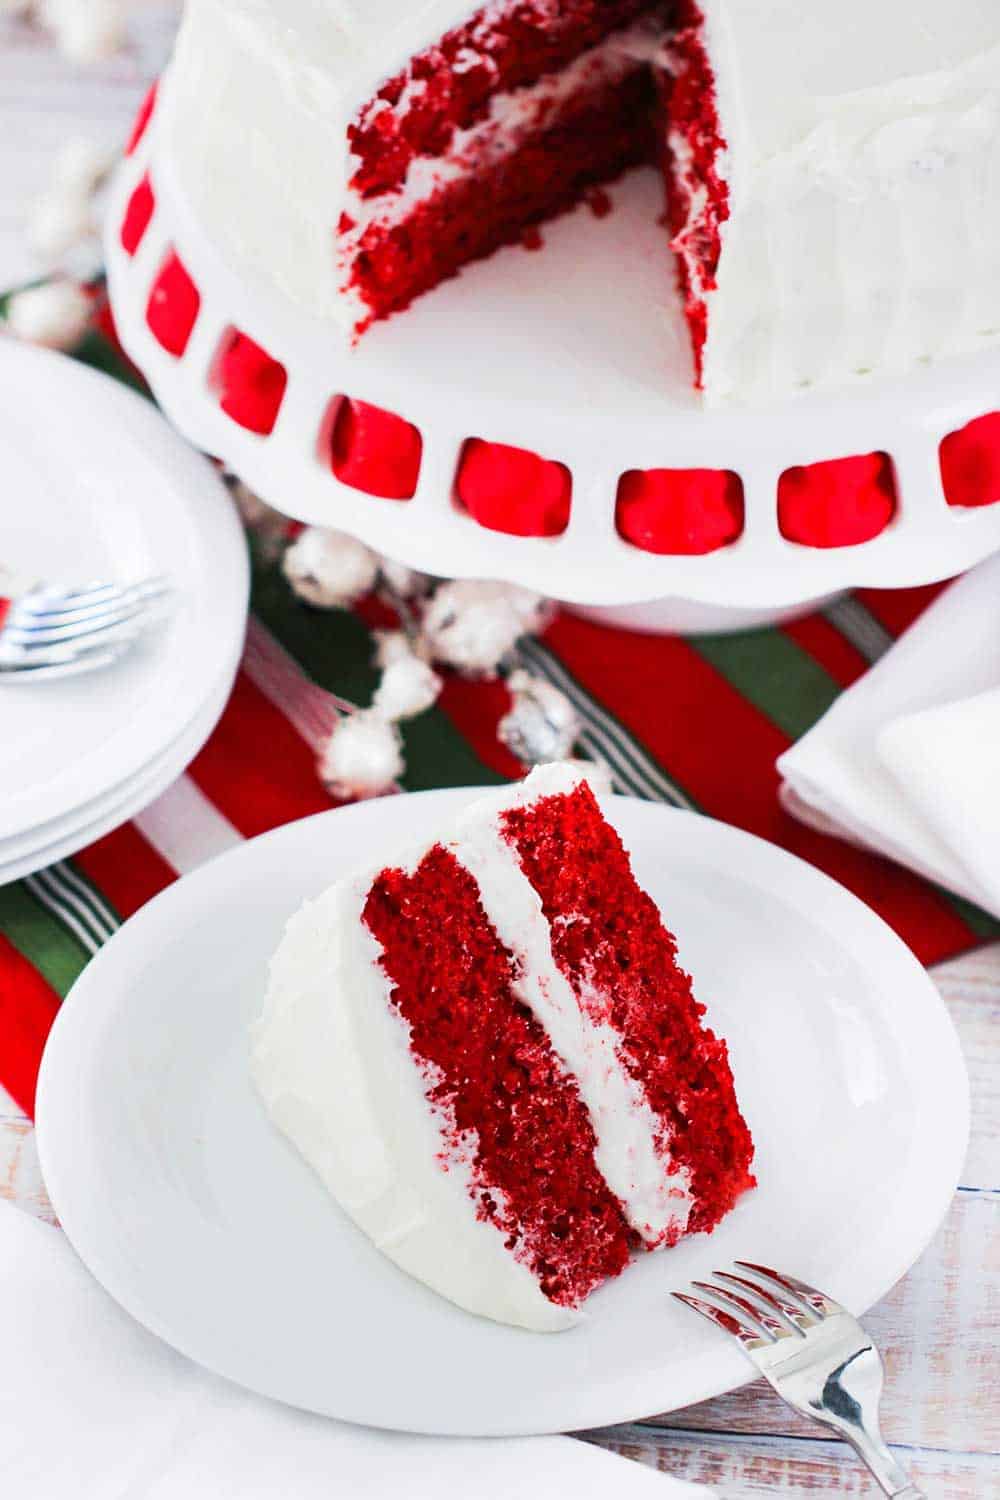 A slice of red velvet cake on a white plate next to the cake on a cake stand with red ribbon. 